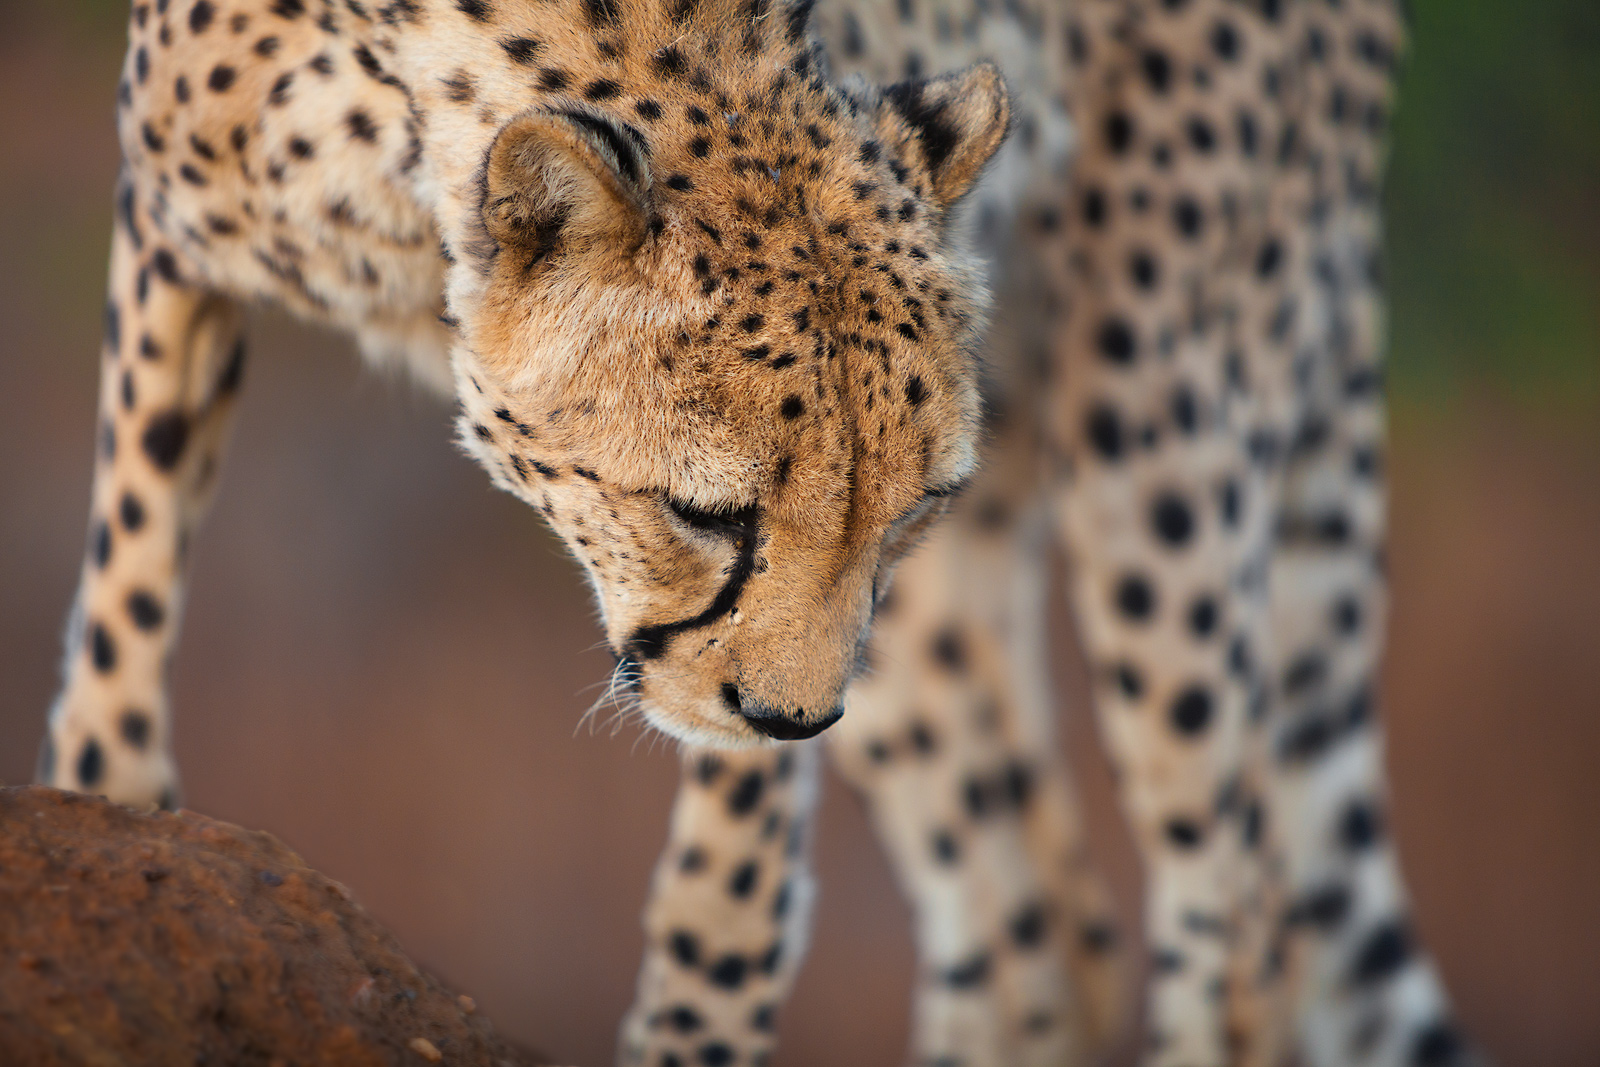 A beautiful cheetah standing on a small hill looking down